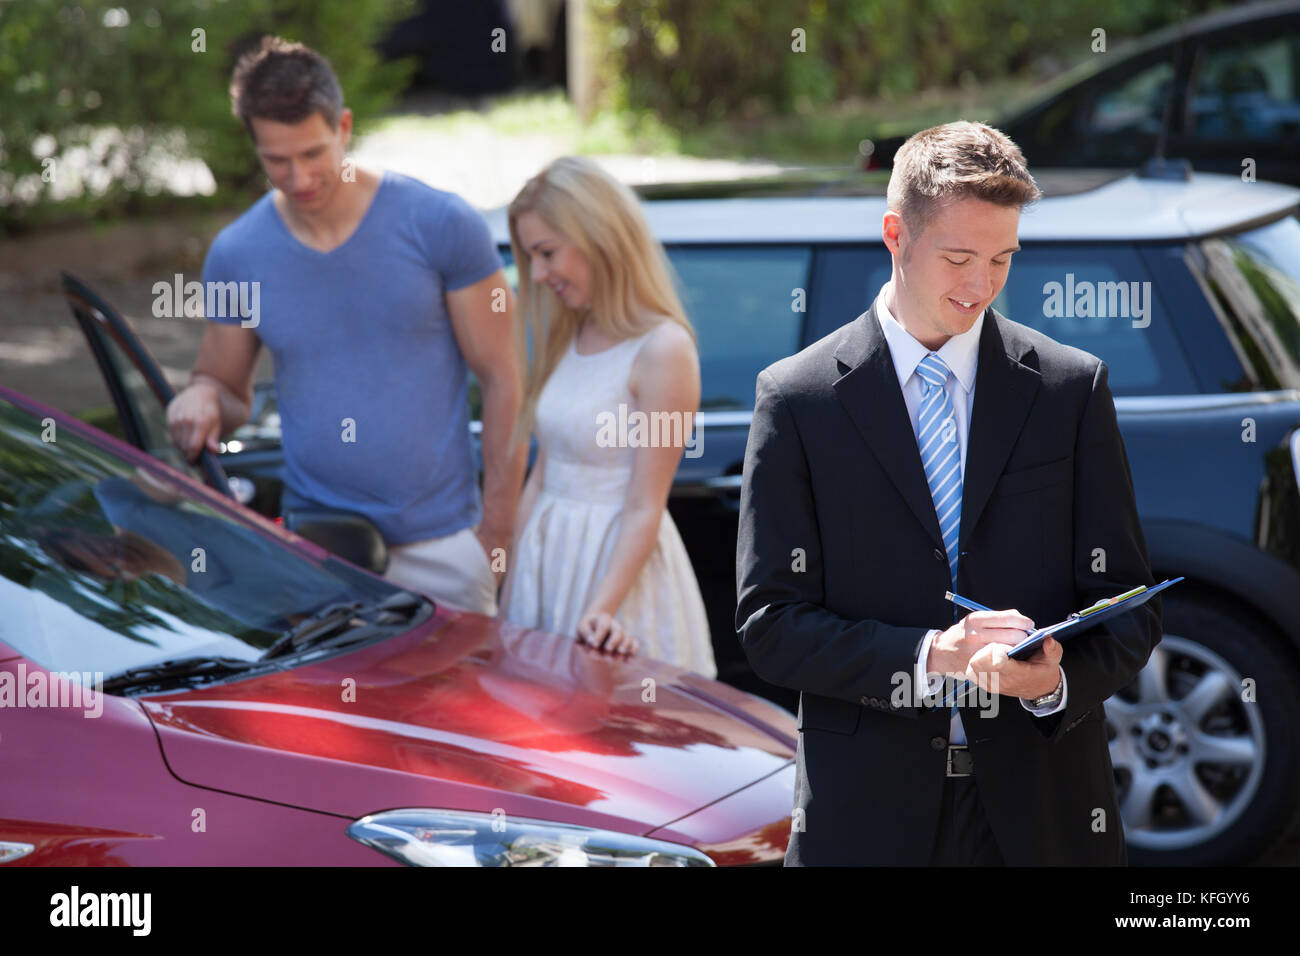 Young salesman writing on clipboard with couple looking at new car in background Stock Photo